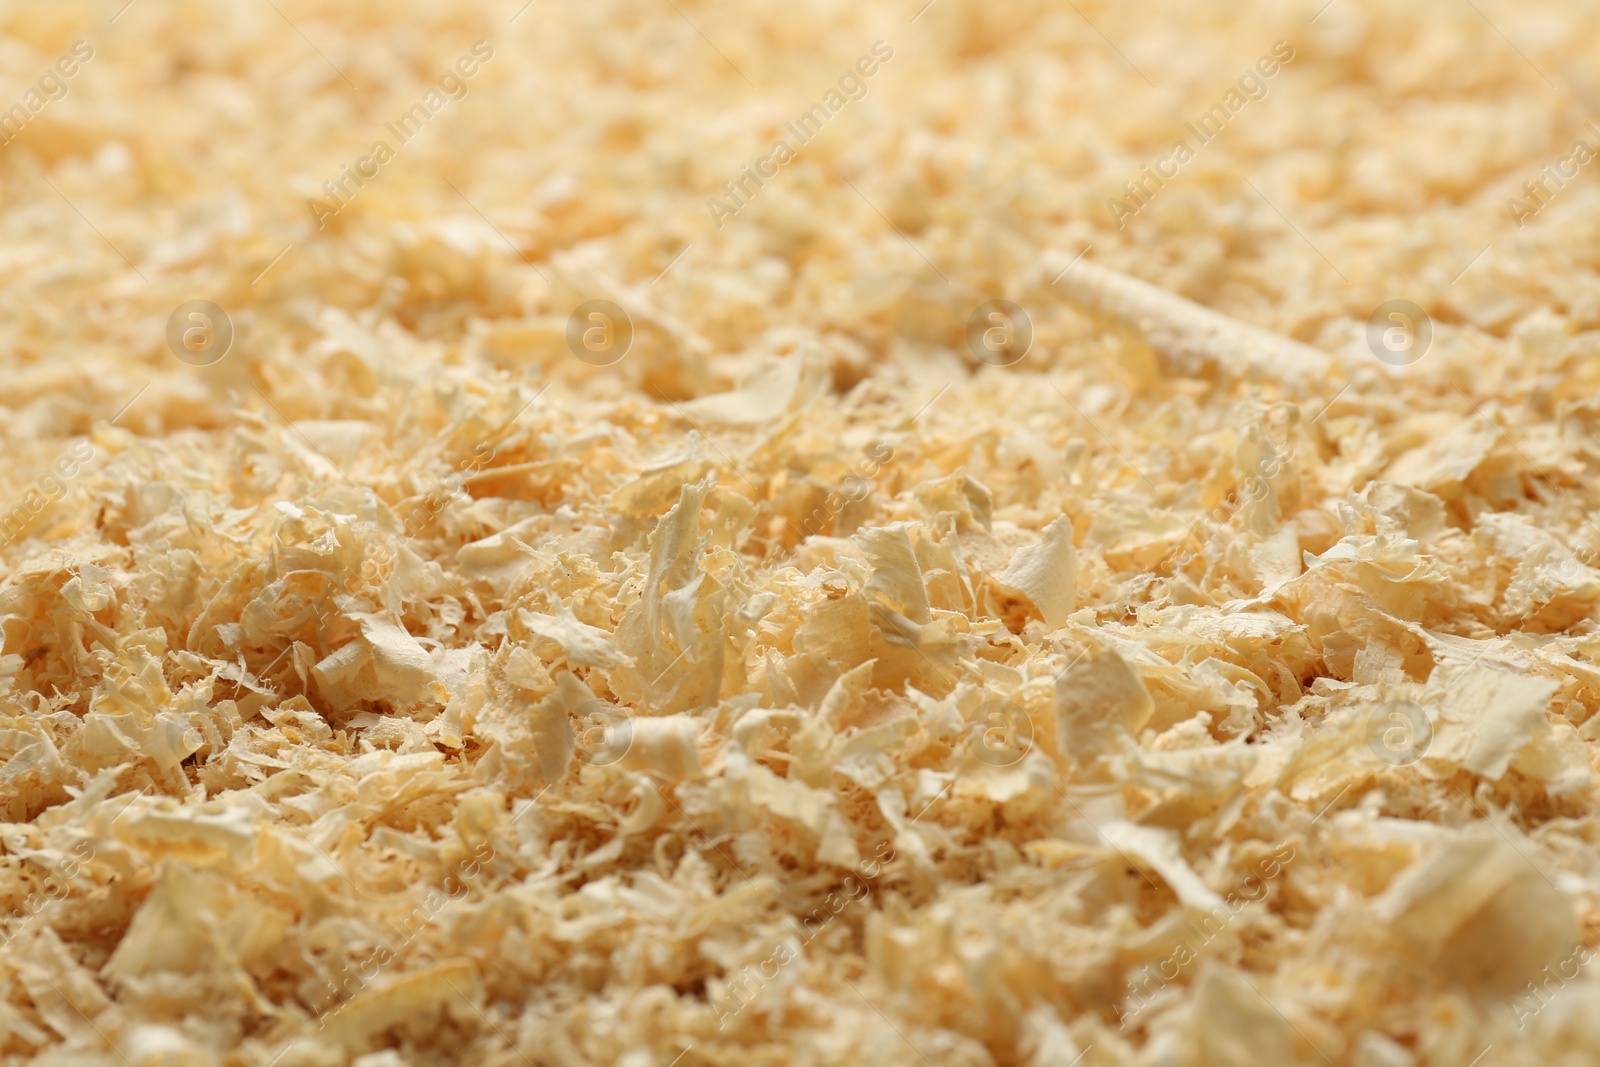 Photo of Dry natural sawdust as background, closeup view